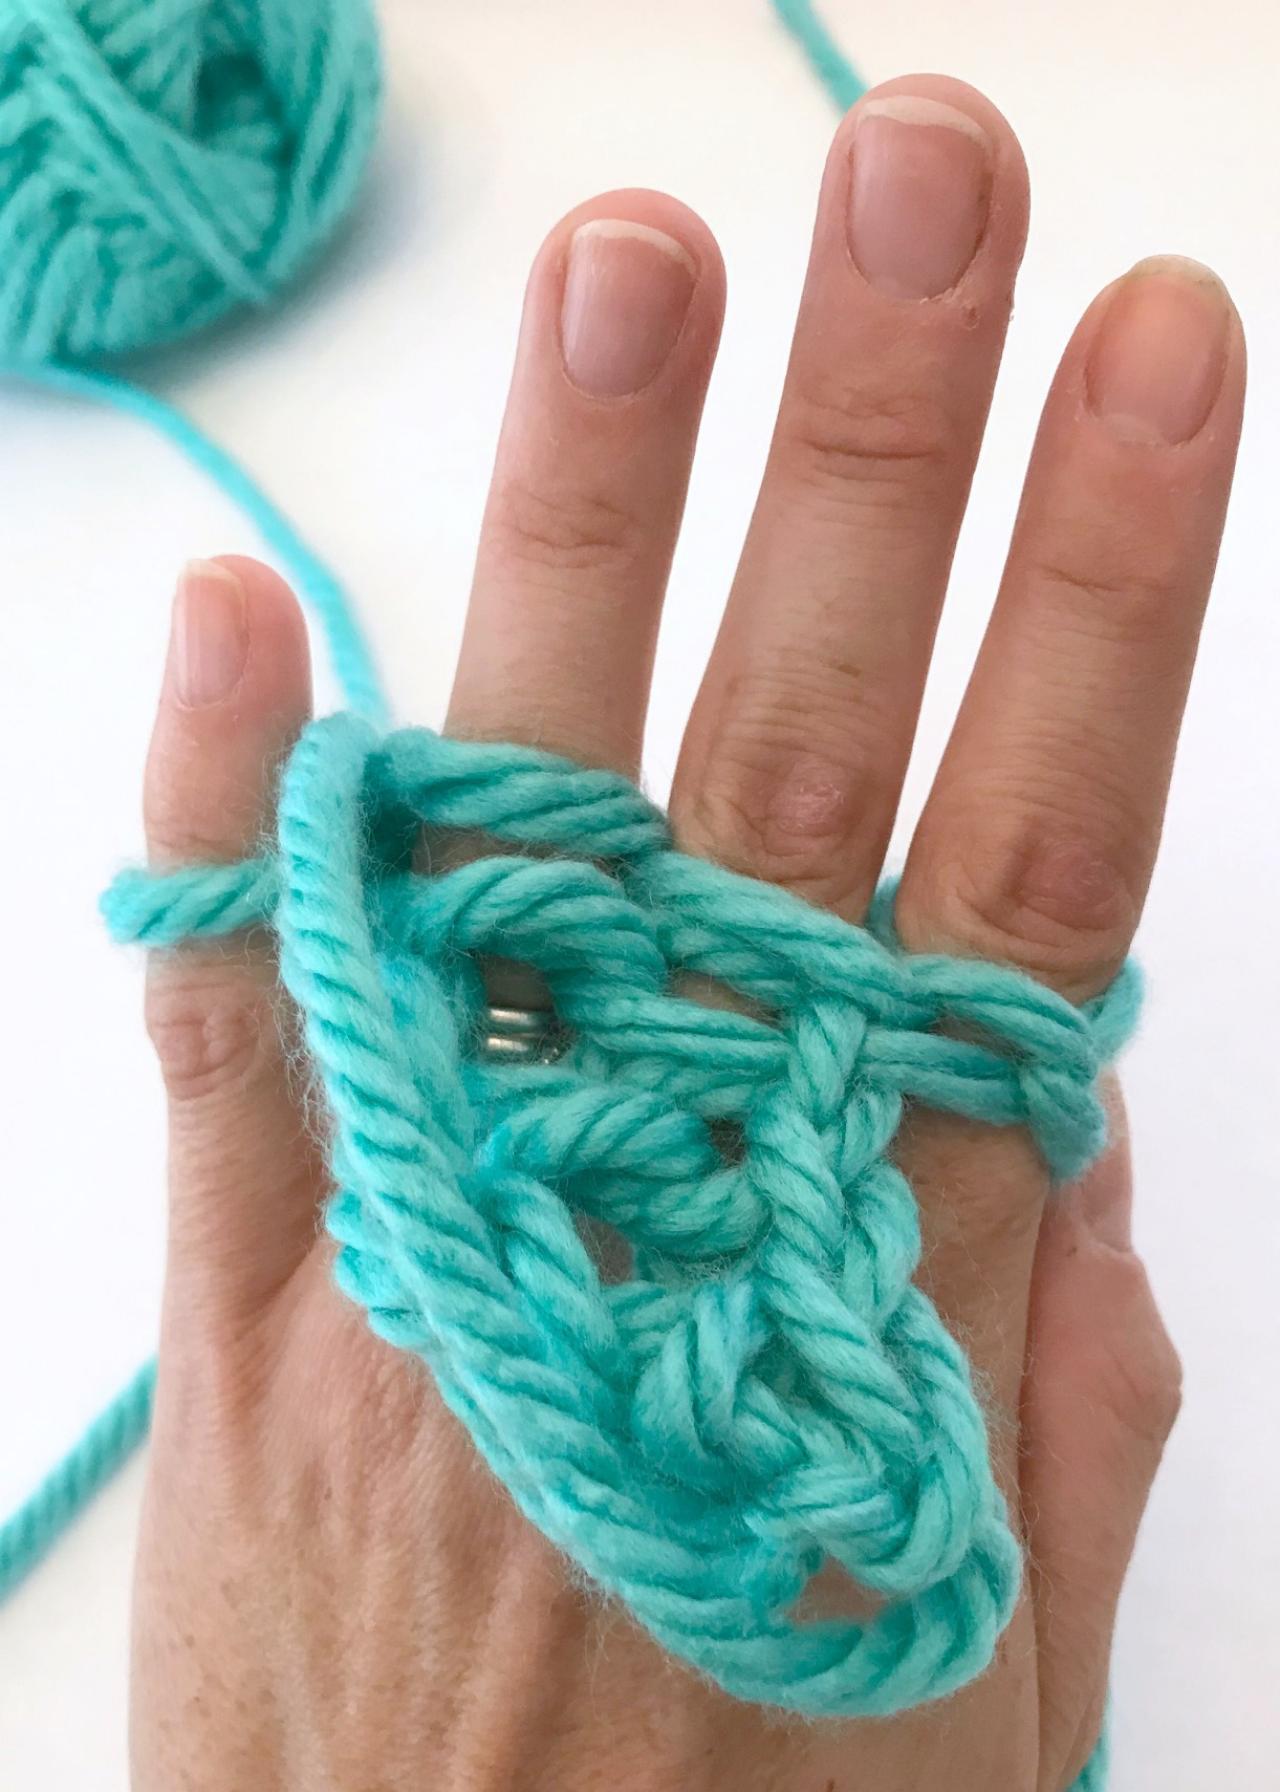 No Knitting Needles Required to Make This Finger-Knit ...